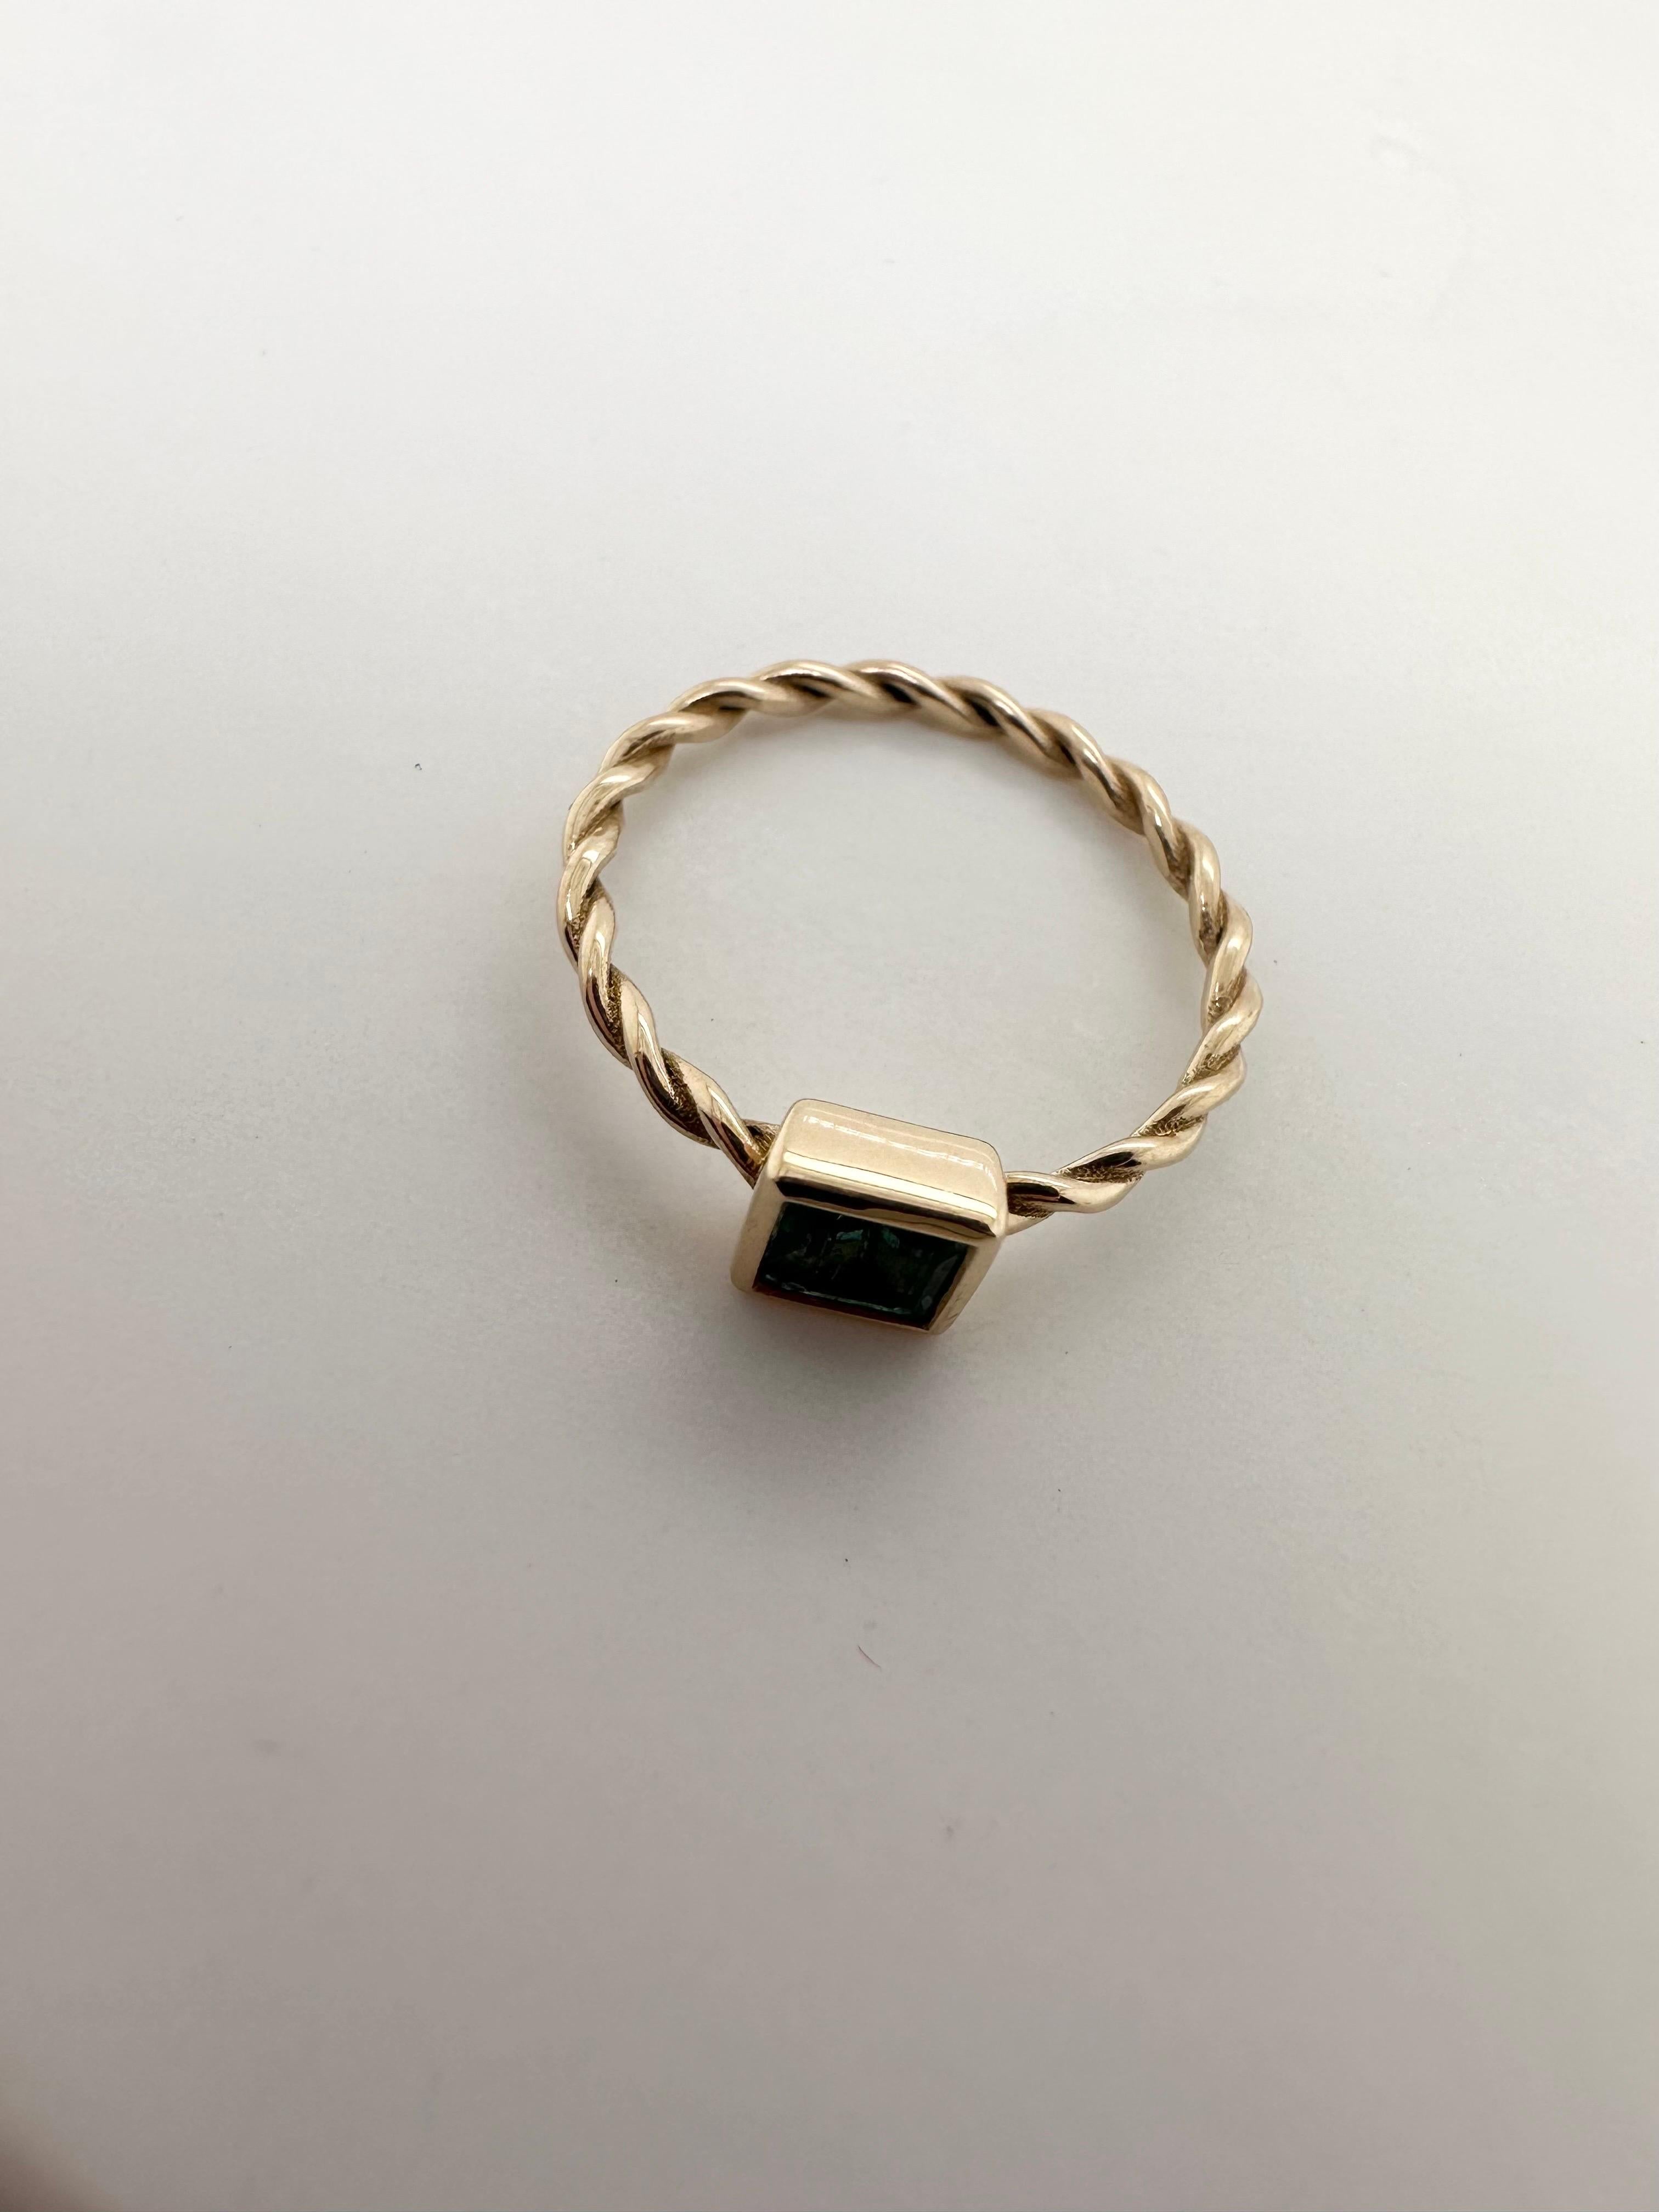 This is a size 3.75 ring ready to ship! THIS RING CANNOT BE RE-SIZED!

Classy Minimalist Ring in 14KT yellow gold, we made the ring with twisted shank and square modern top, the ring can be worn as stackable, engagement, everyday and just any